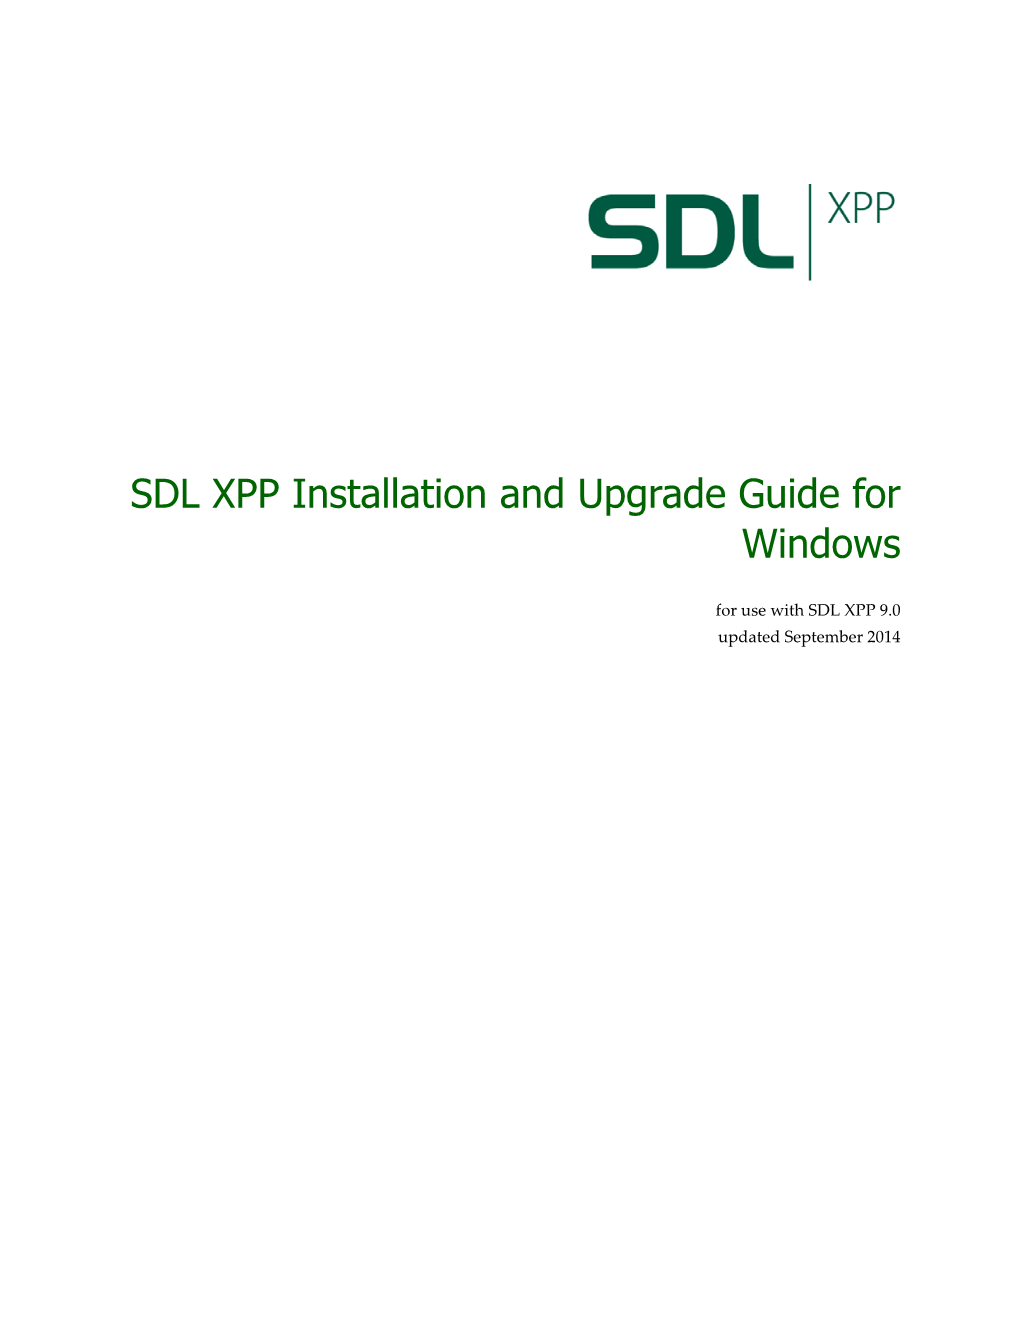 SDL XPP Installation and Upgrade Guide for Windows